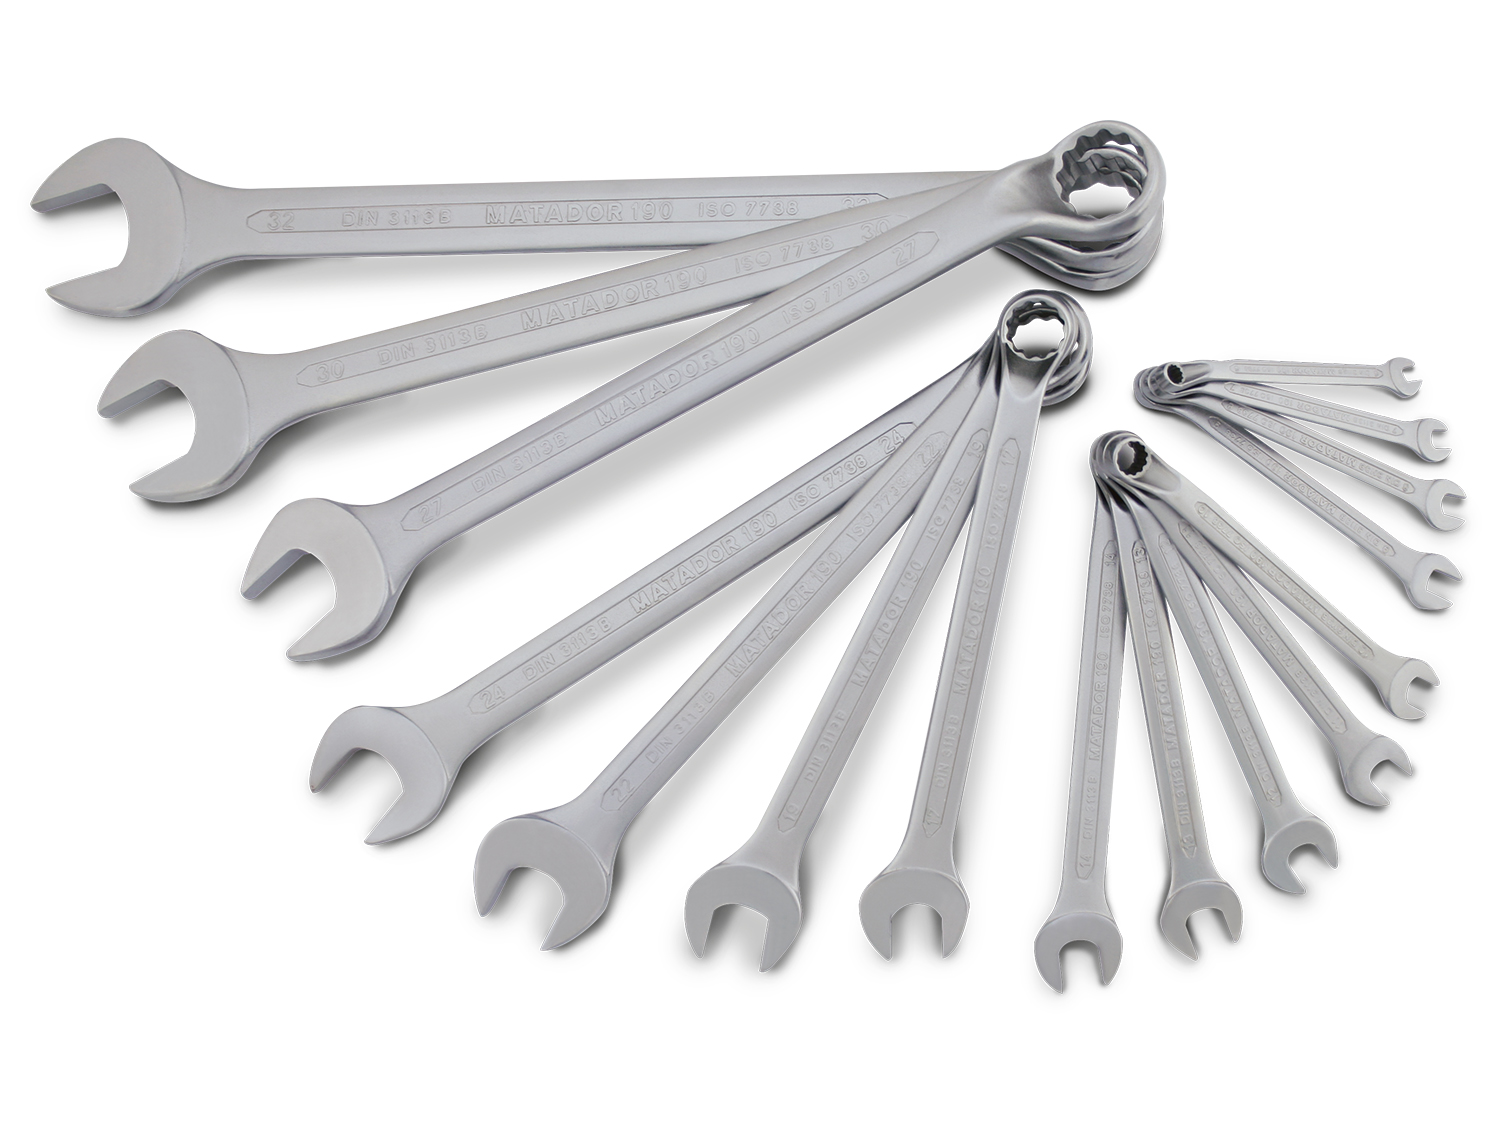 Tried and tested assortments of combination spanners.